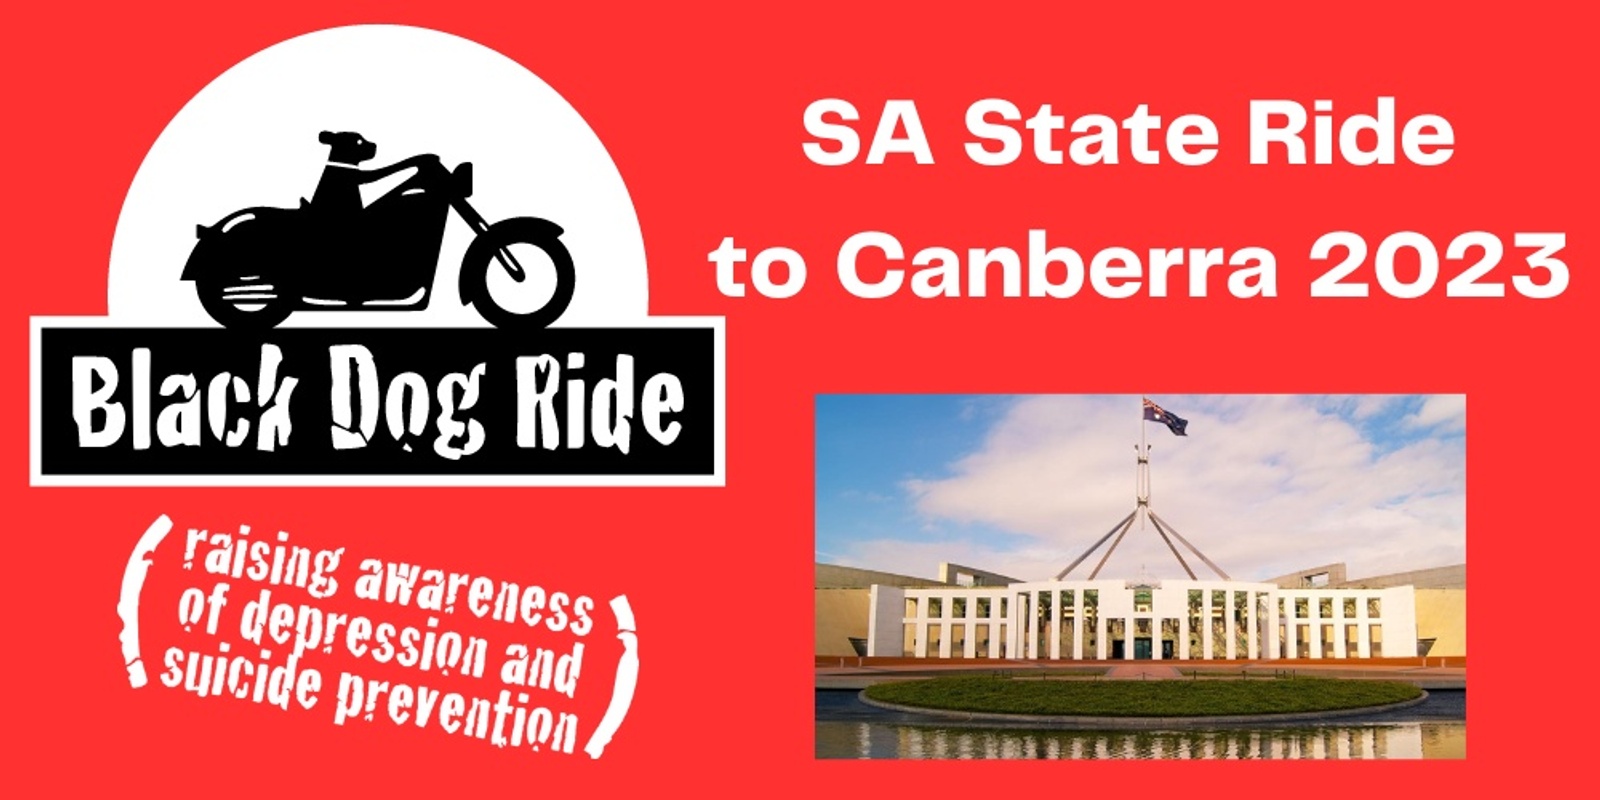 Black Dog Ride SA State Ride to Canberra 2023